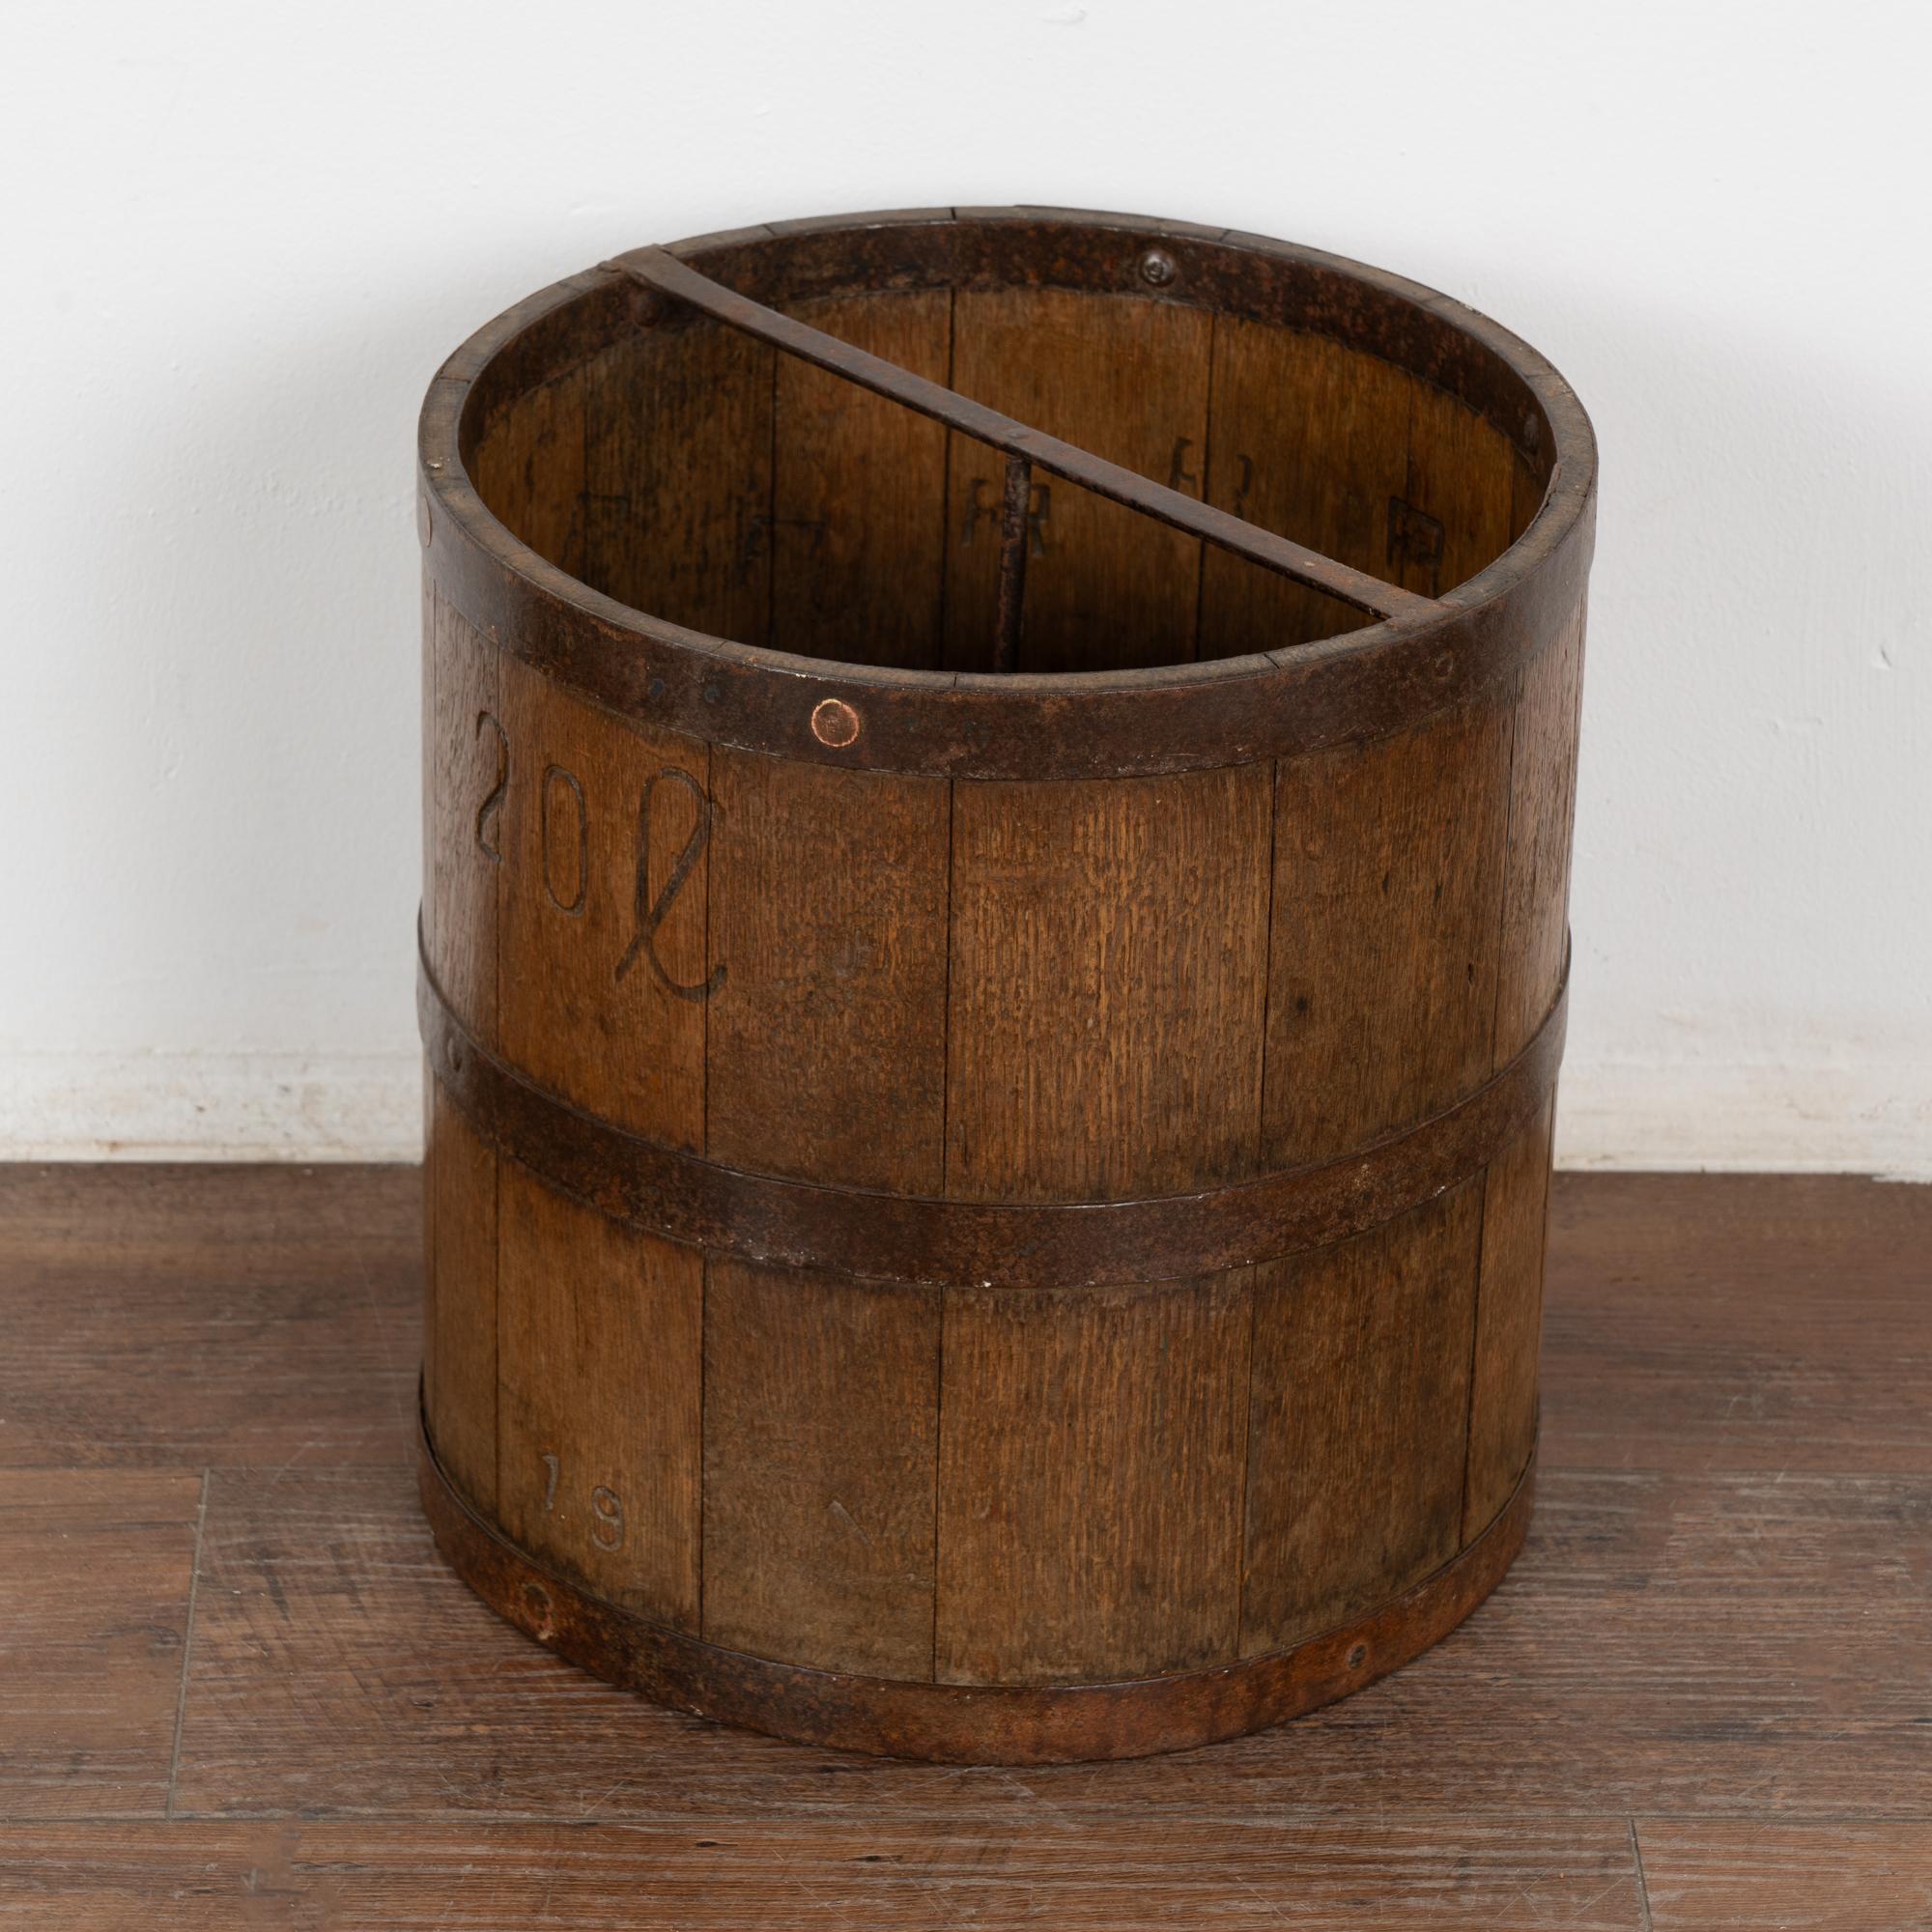 Country Oak Measuring Bucket with Metal Bands, Hungary circa 1920